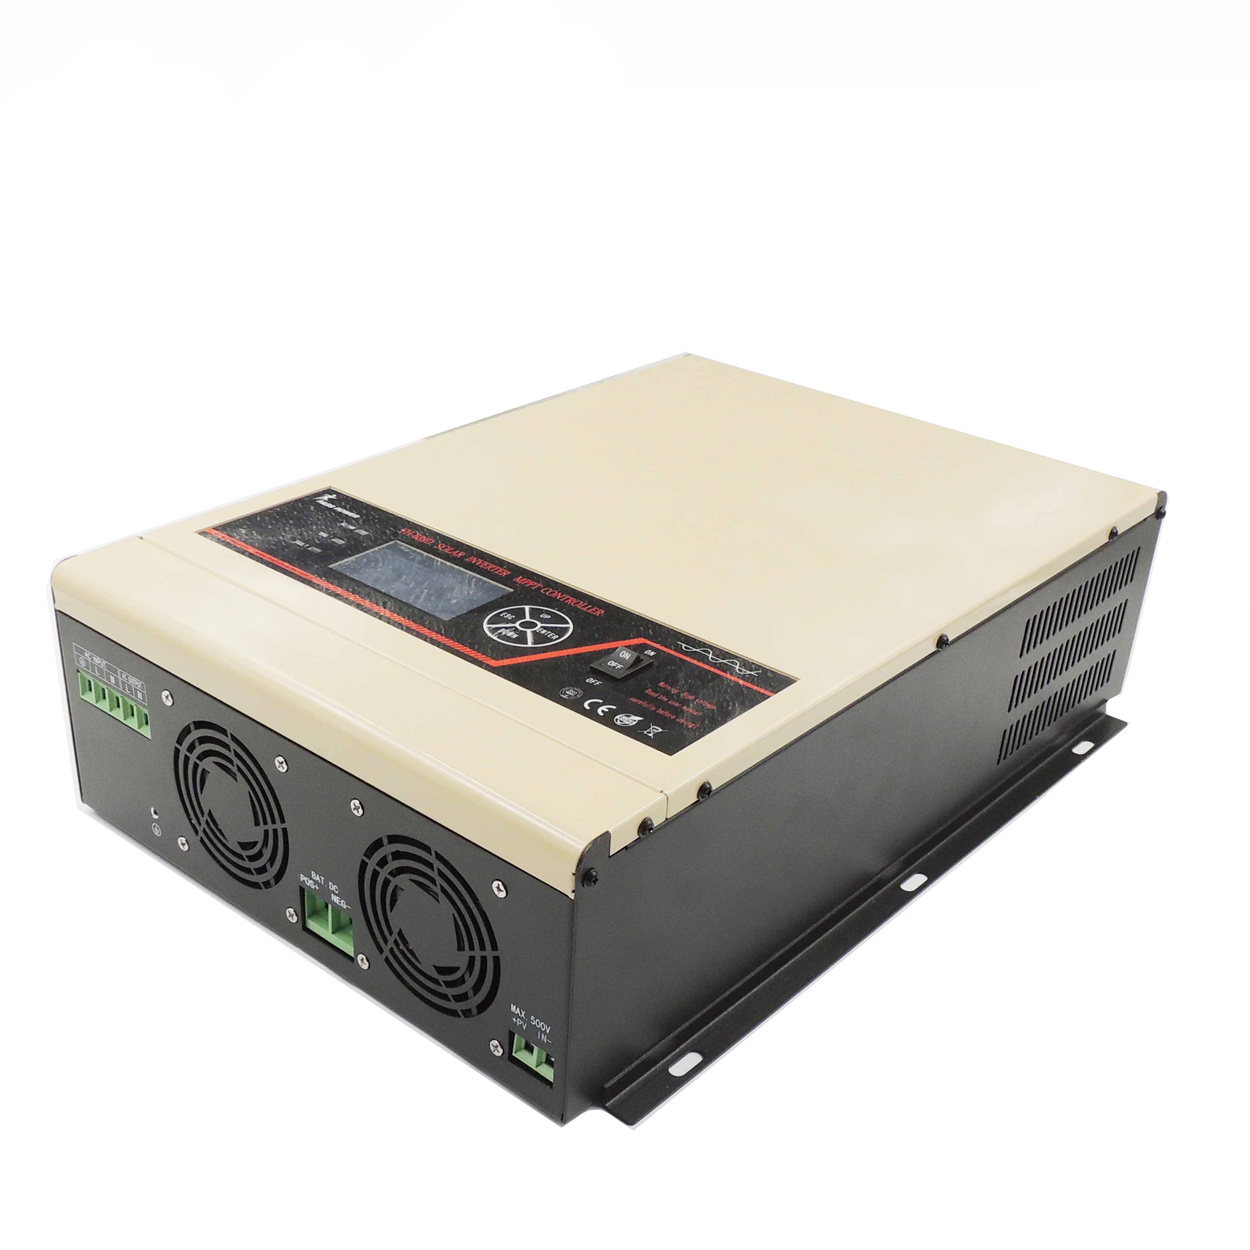 3.5kw 3500w off grid inversor high frequency hybrid MPPT solar inverter with 100A solar energy PV charger